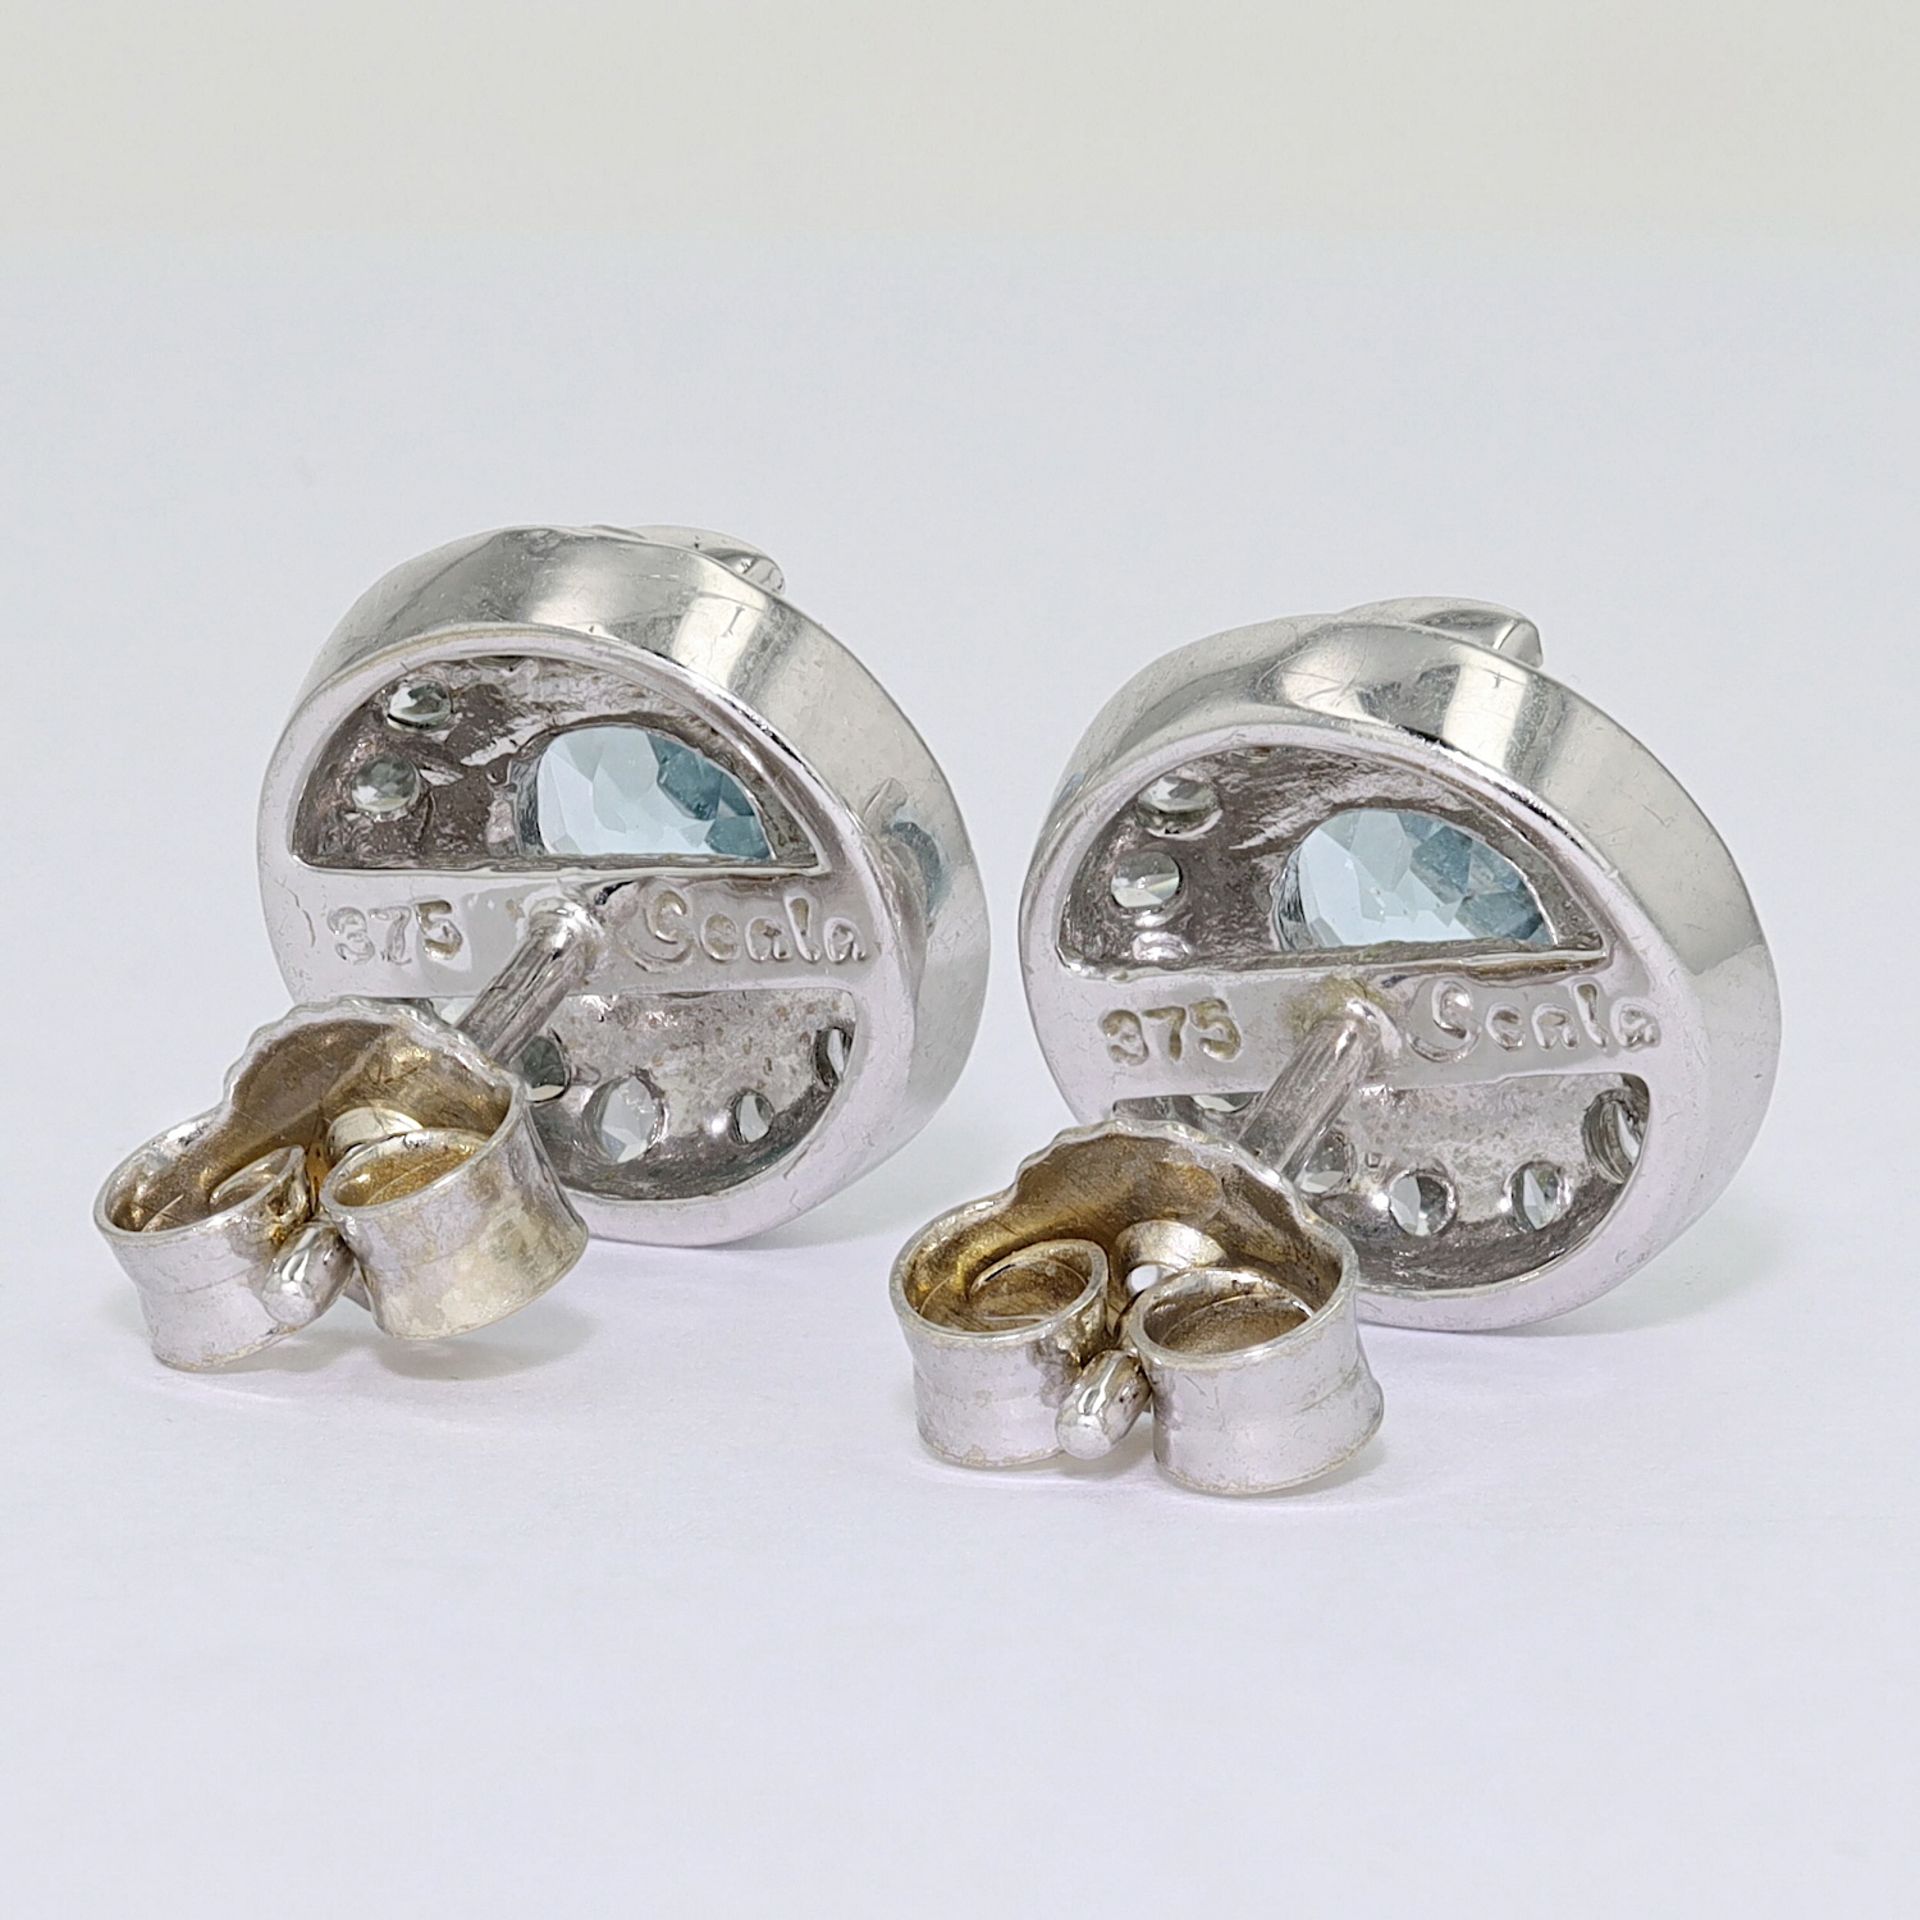 1 pair of stud earrings with topazes and zirconia - Image 4 of 4